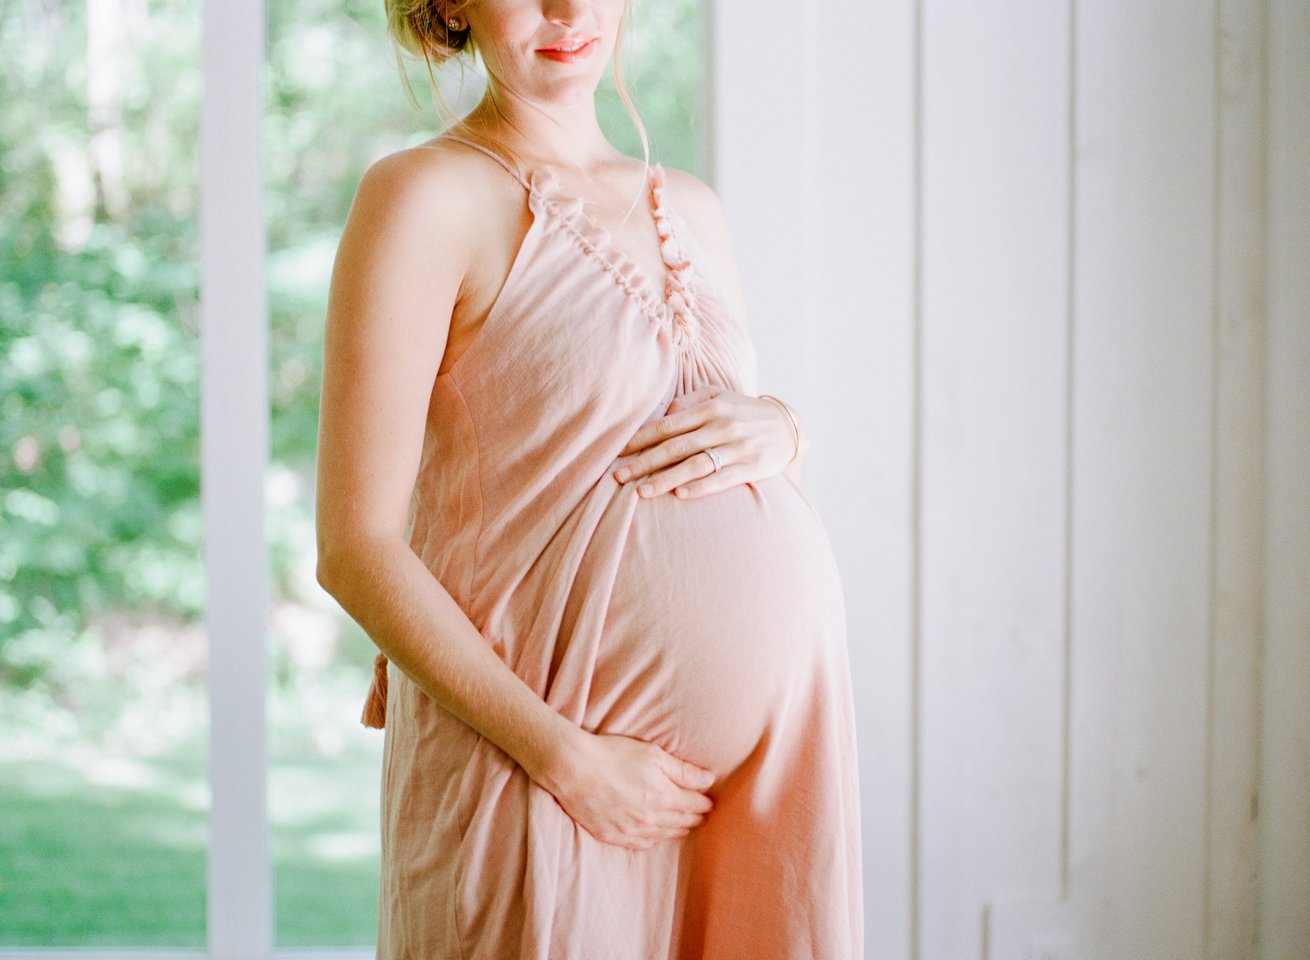 film maternity session - Lauren Jolly Photography